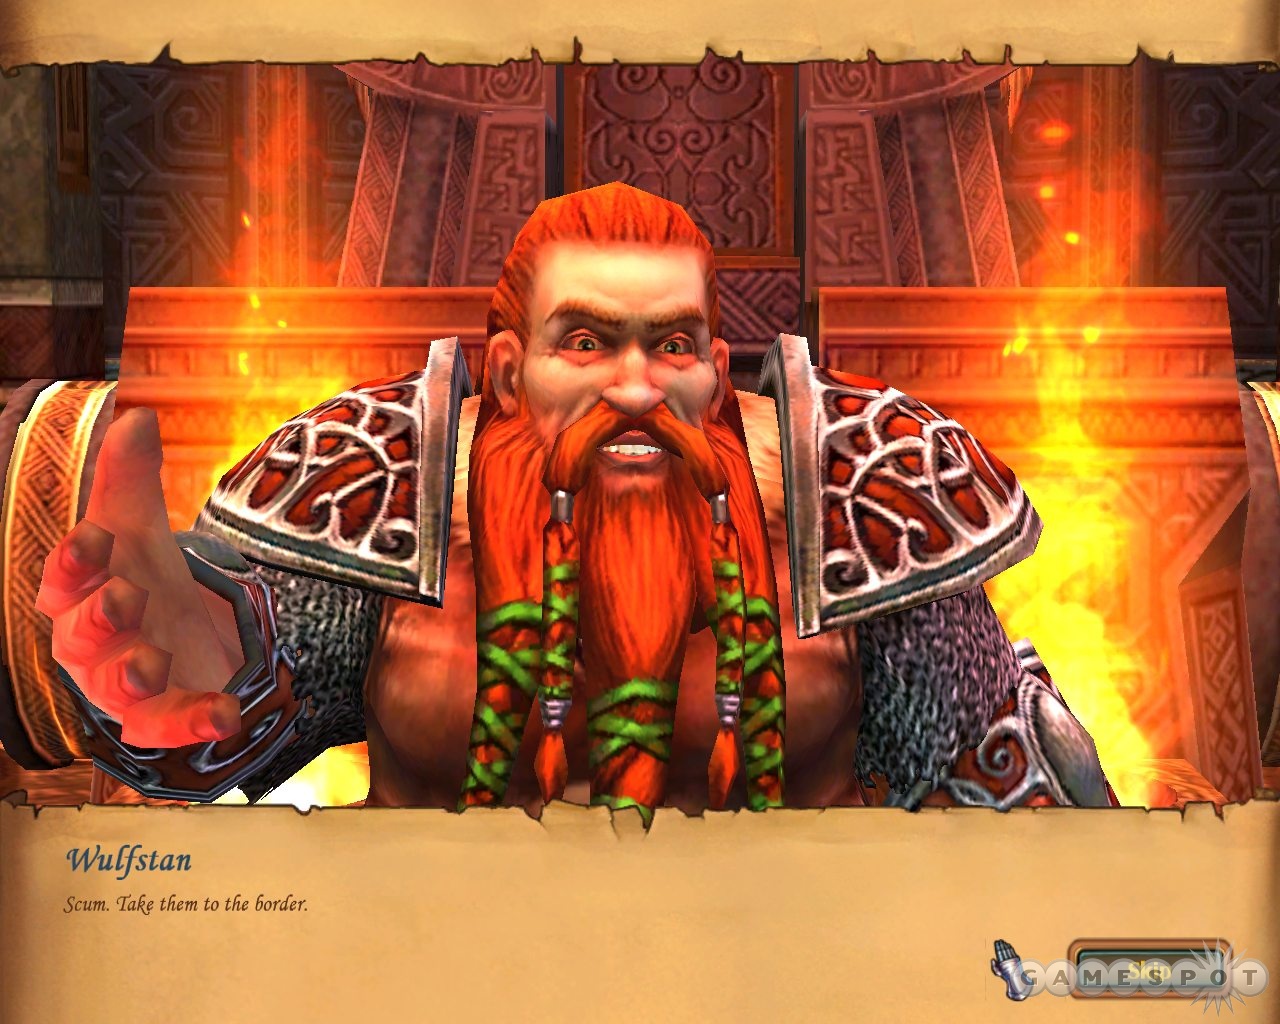 Just once we'd like to see a clean-shaven dwarf.